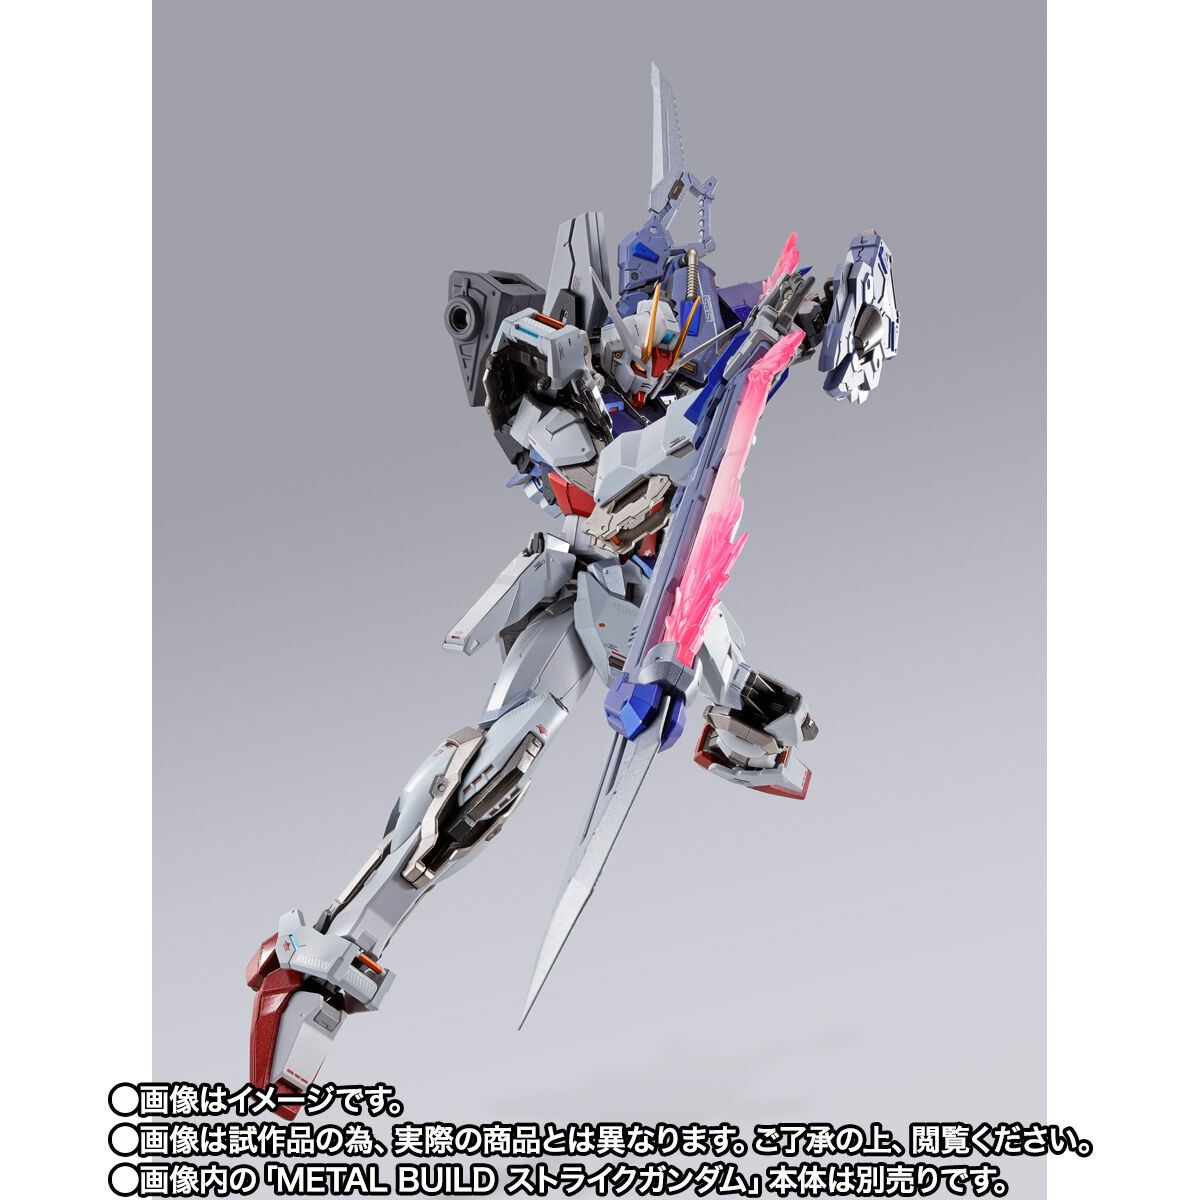 Metal Build AQM/E-X02 Sword Striker for Gundam Seed Series(Metal Build 10th Anniversary Limited Package)